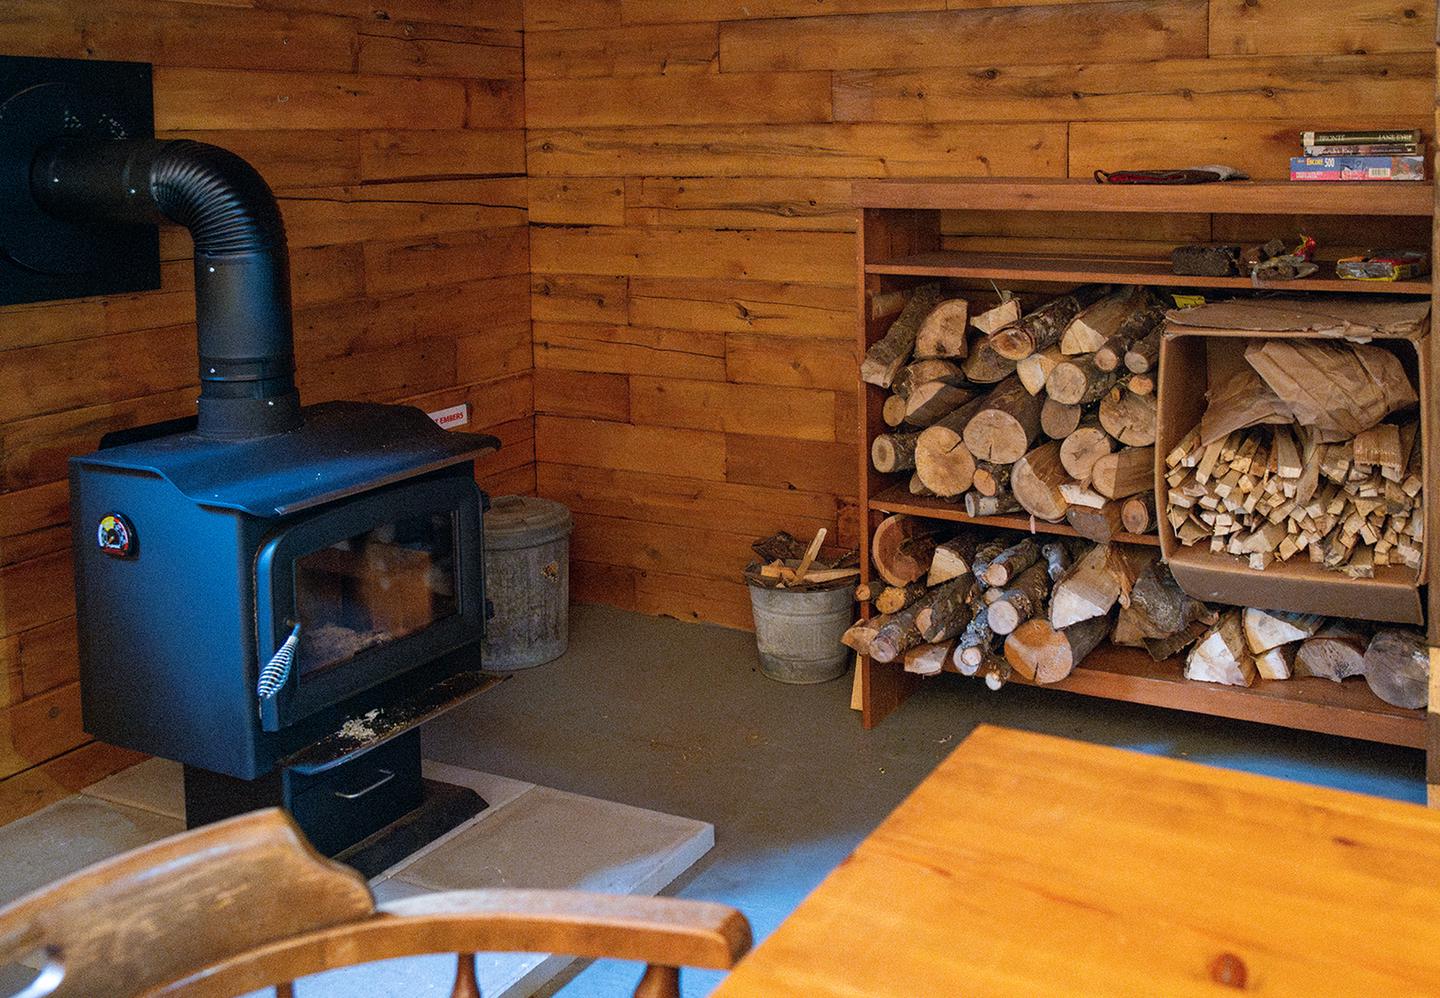 A black woodstove on the left and neatly arranged firewood to the right, adjacent to the stove sit inside of a wooden cabin.Stay warm by the woodstove in Big Spring Brook Hut.